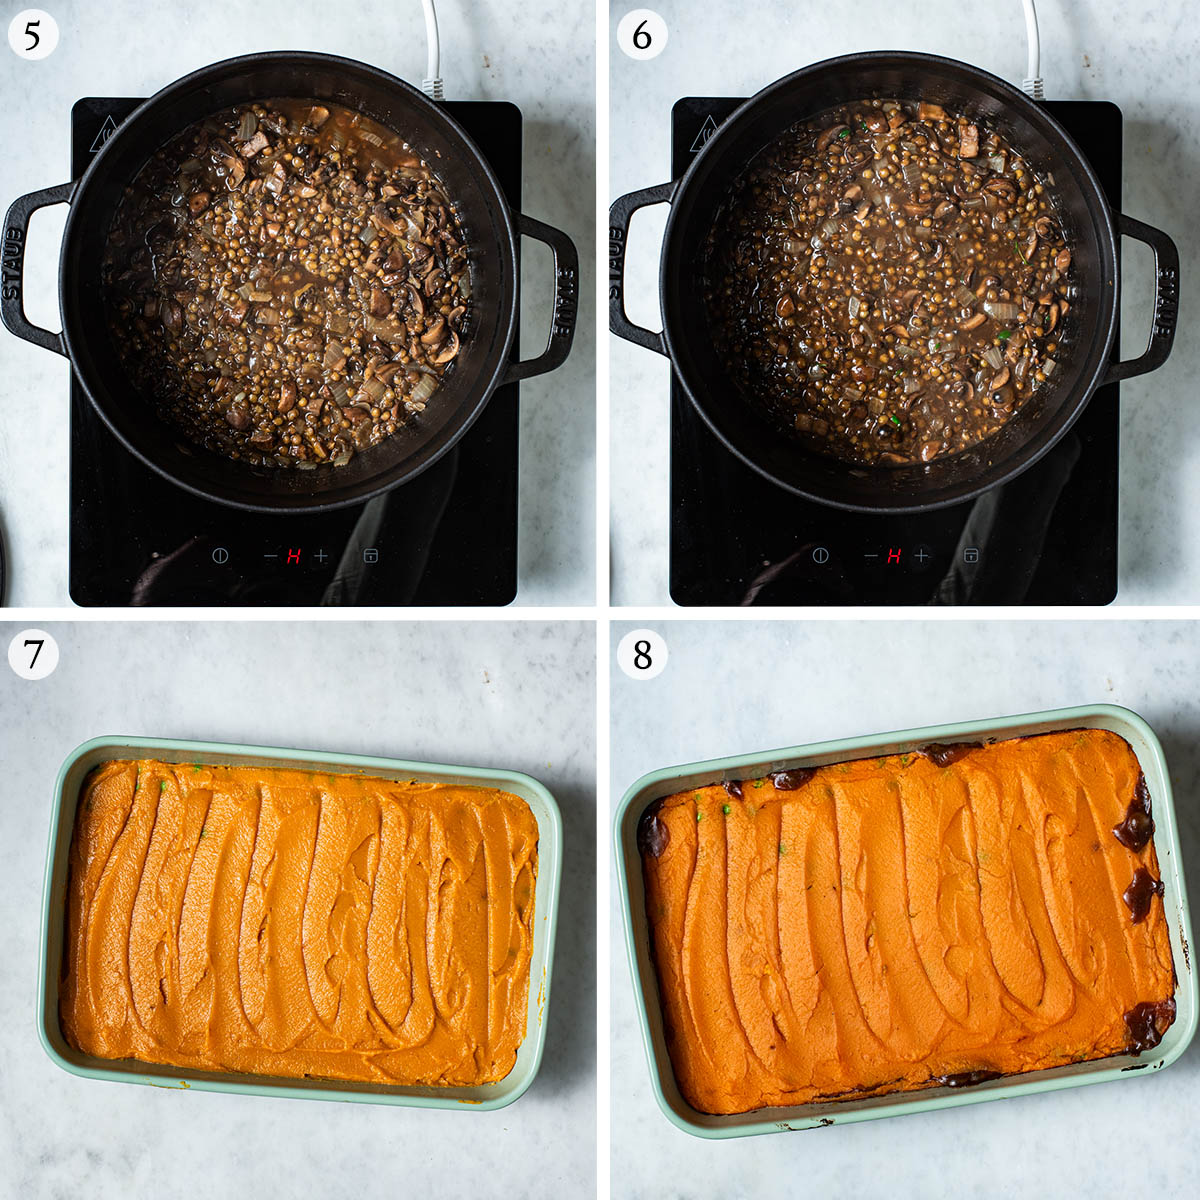 Cottage pie steps 5 to 8, finishing the filling and before and after baking.